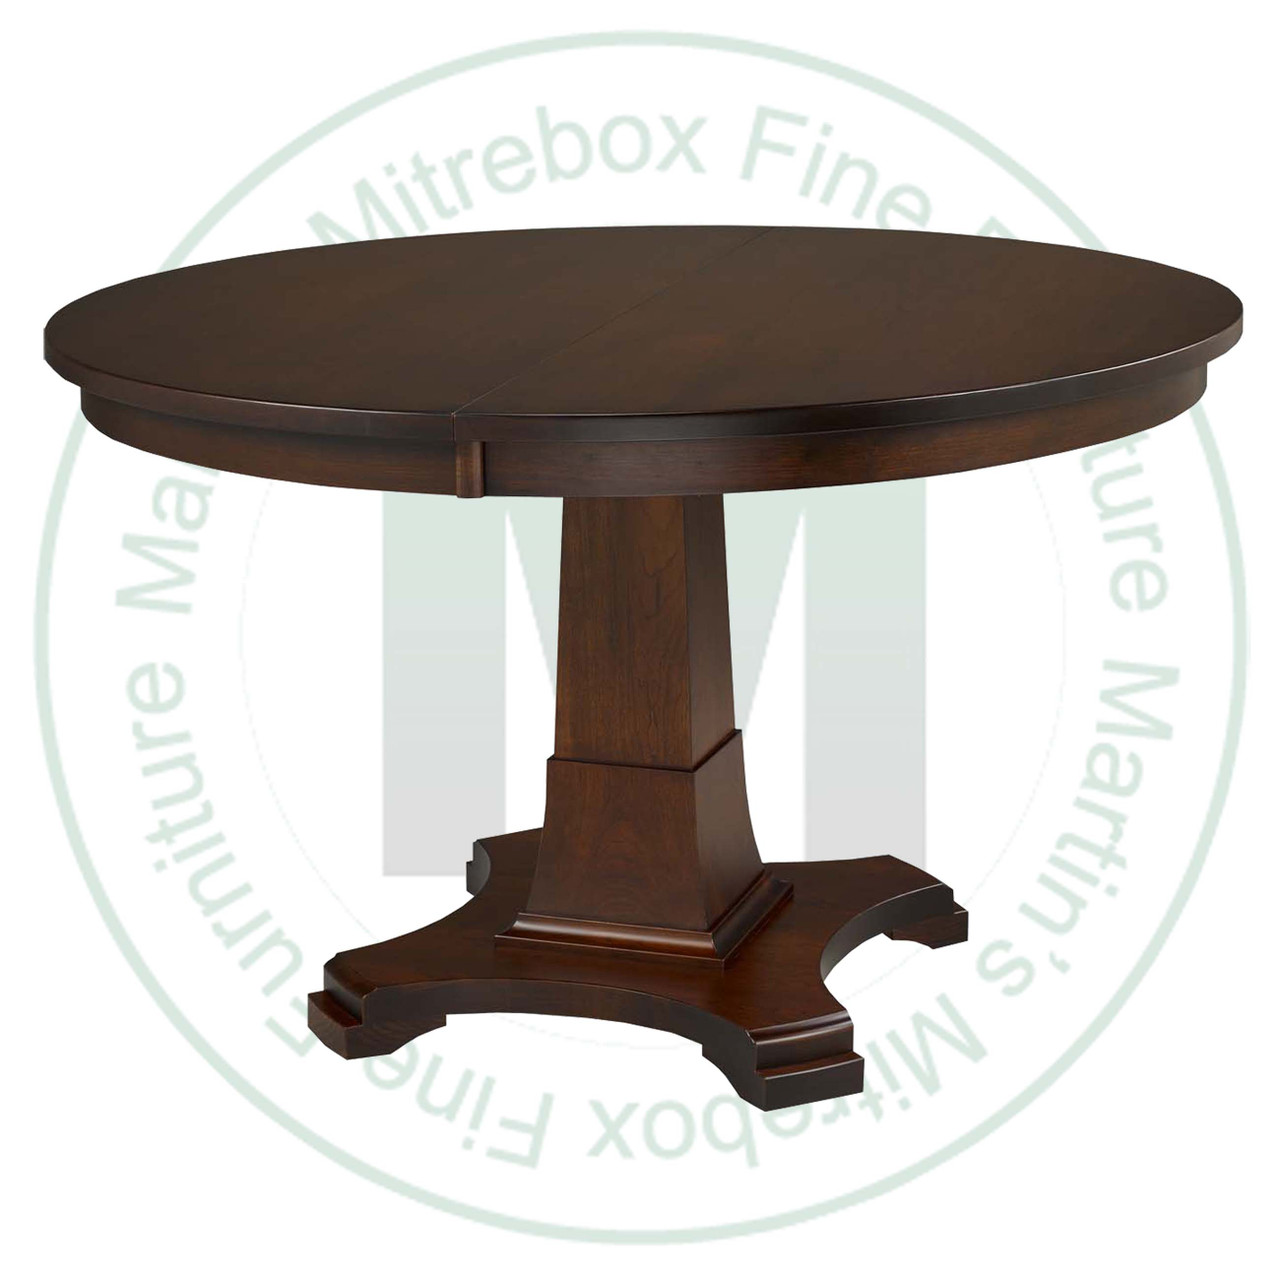 Maple Abbey Single Pedestal Table 48''D x 48''W x 30''H Round Solid Table. Table Has 1.25'' Thick Top